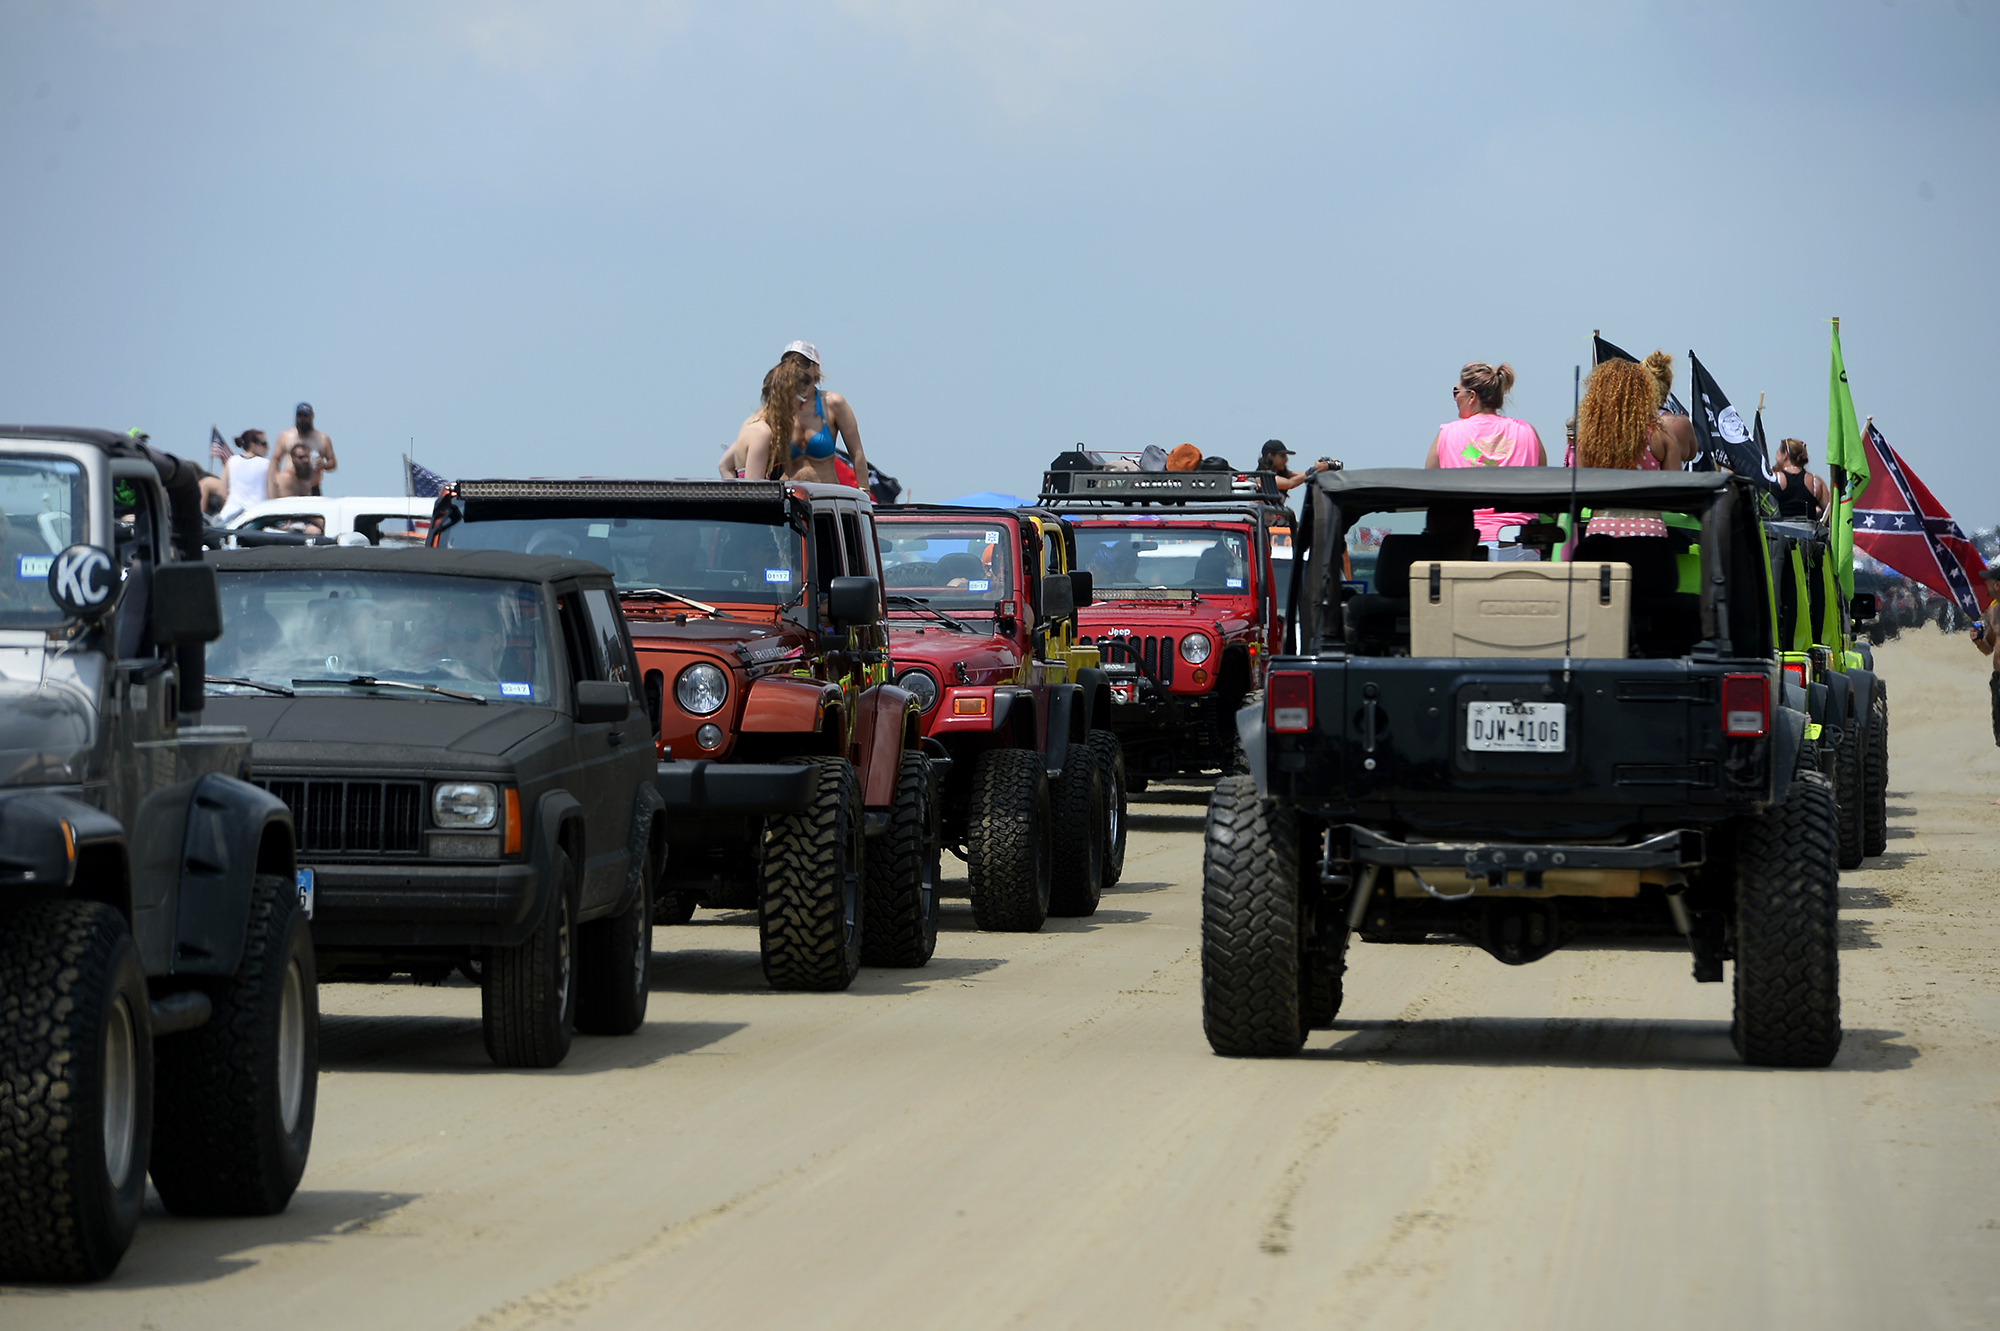 Texas Jeep enthusiasts flaunt custom rides during 'Go Topless Weekend